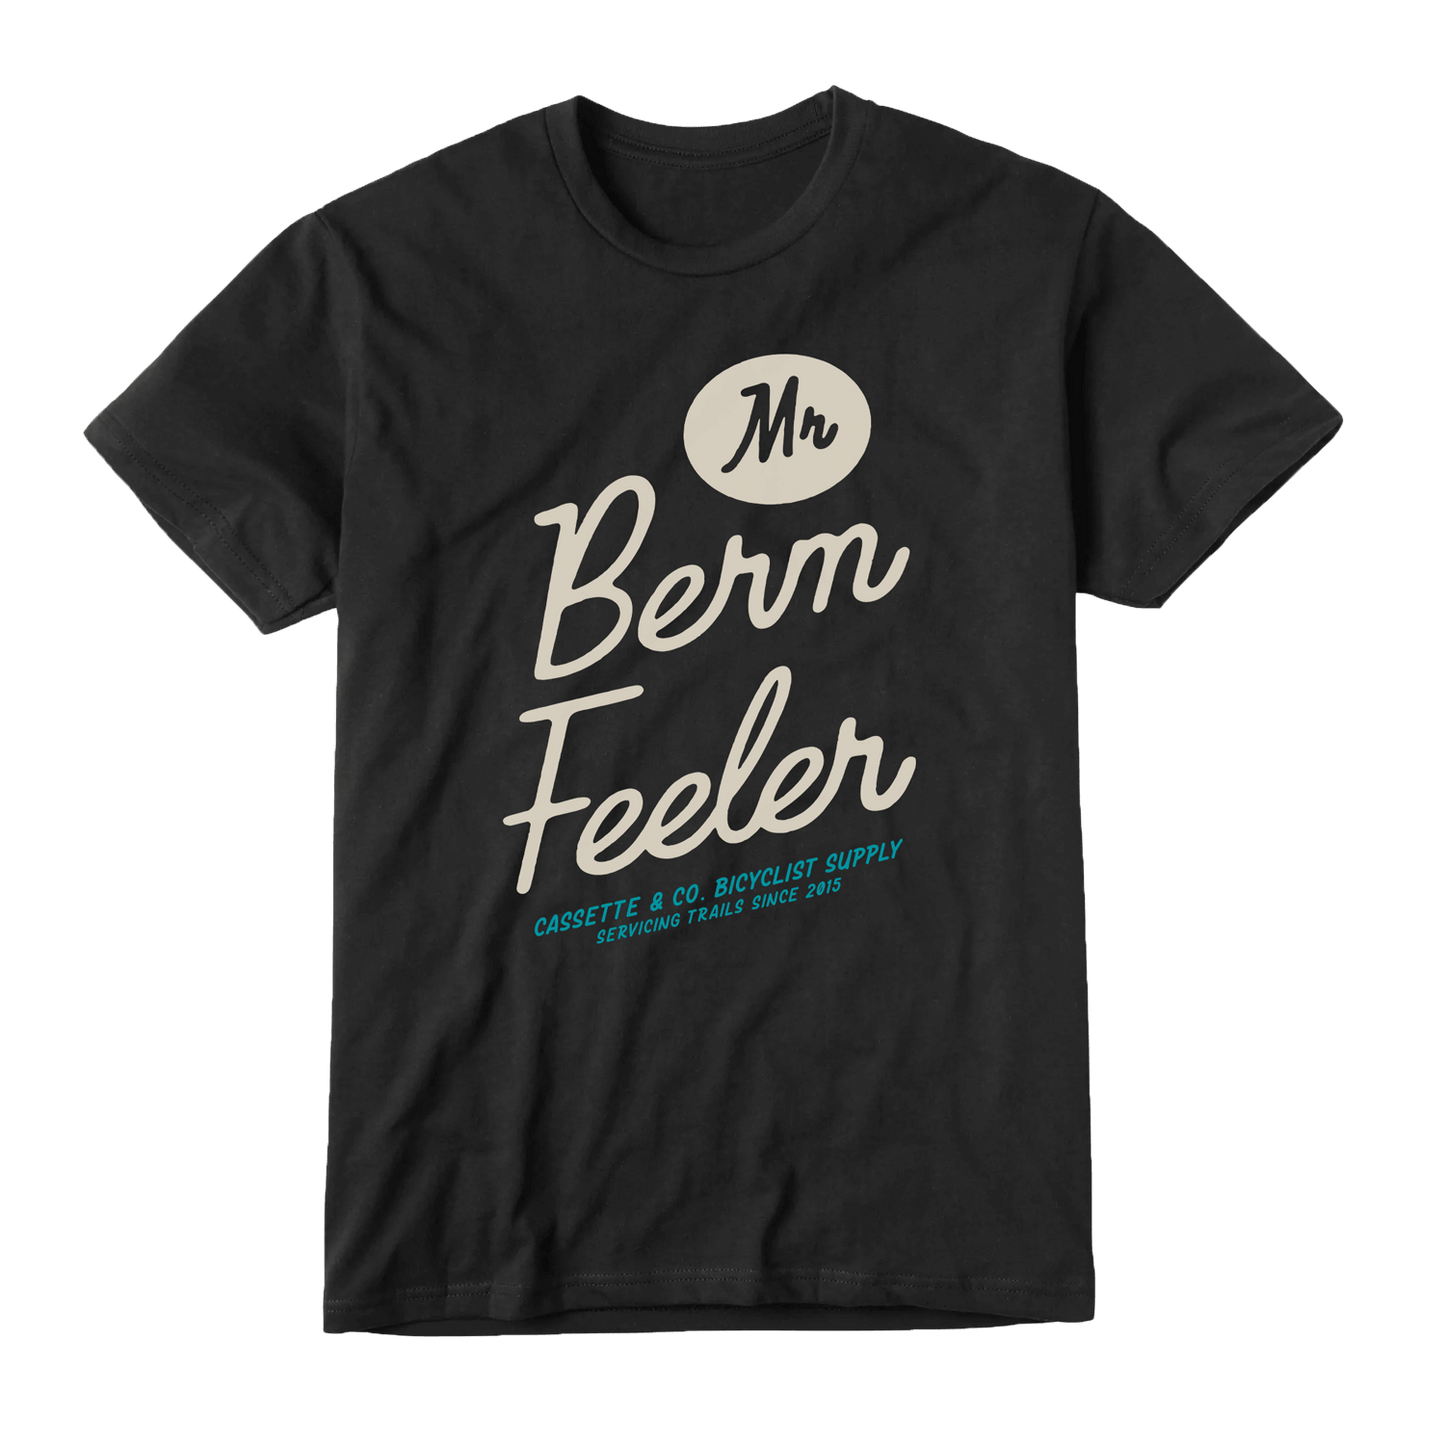 Mr berm feeler mountain biker t shirt in black with two color print